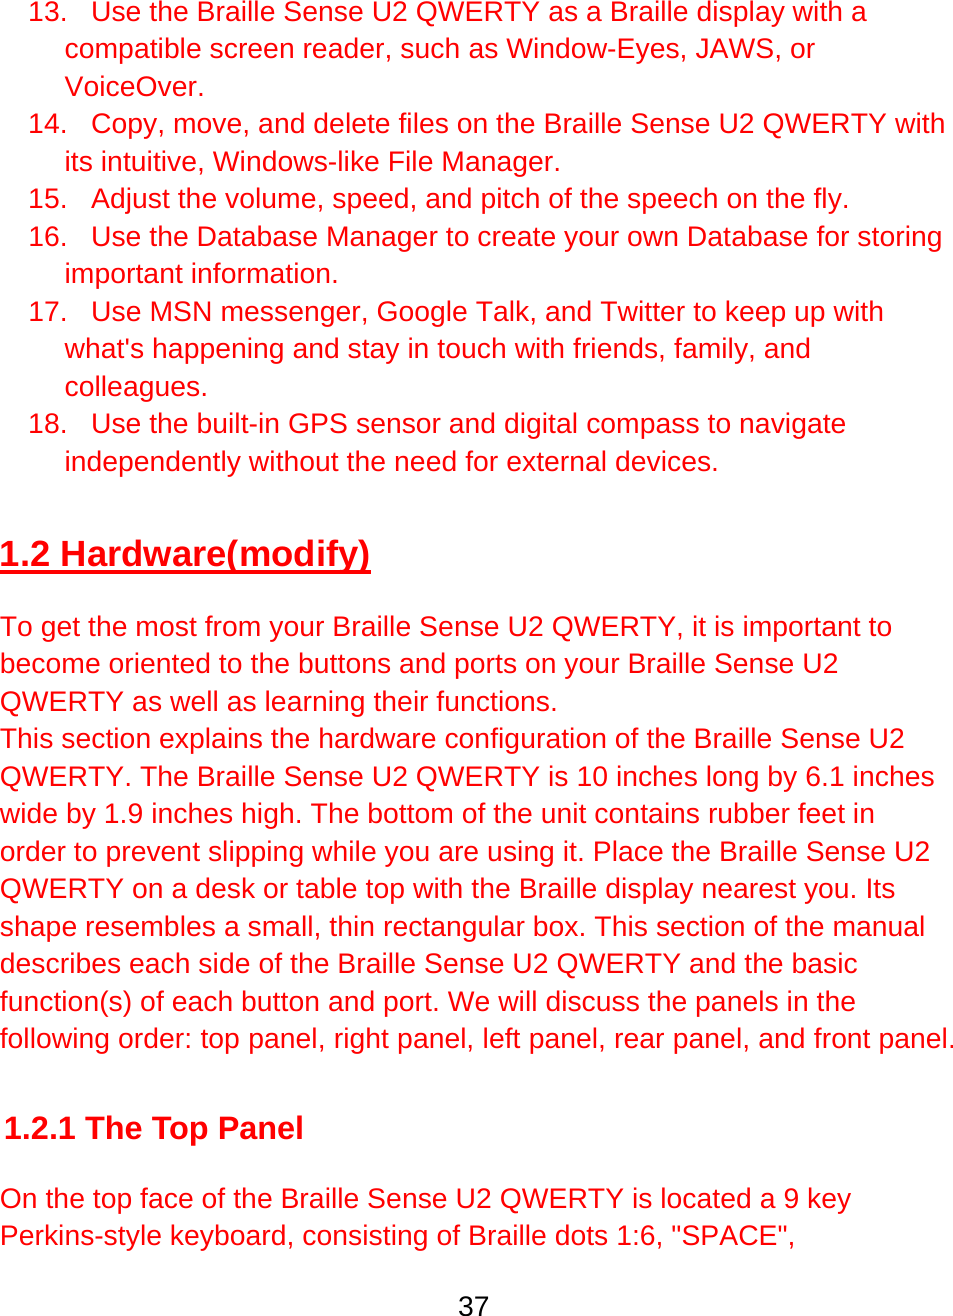 37  13.  Use the Braille Sense U2 QWERTY as a Braille display with a compatible screen reader, such as Window-Eyes, JAWS, or VoiceOver. 14.  Copy, move, and delete files on the Braille Sense U2 QWERTY with its intuitive, Windows-like File Manager. 15.  Adjust the volume, speed, and pitch of the speech on the fly.  16.  Use the Database Manager to create your own Database for storing important information. 17.  Use MSN messenger, Google Talk, and Twitter to keep up with what&apos;s happening and stay in touch with friends, family, and colleagues.  18.  Use the built-in GPS sensor and digital compass to navigate independently without the need for external devices.  1.2 Hardware(modify)  To get the most from your Braille Sense U2 QWERTY, it is important to become oriented to the buttons and ports on your Braille Sense U2 QWERTY as well as learning their functions.  This section explains the hardware configuration of the Braille Sense U2 QWERTY. The Braille Sense U2 QWERTY is 10 inches long by 6.1 inches wide by 1.9 inches high. The bottom of the unit contains rubber feet in order to prevent slipping while you are using it. Place the Braille Sense U2 QWERTY on a desk or table top with the Braille display nearest you. Its shape resembles a small, thin rectangular box. This section of the manual describes each side of the Braille Sense U2 QWERTY and the basic function(s) of each button and port. We will discuss the panels in the following order: top panel, right panel, left panel, rear panel, and front panel.  1.2.1 The Top Panel  On the top face of the Braille Sense U2 QWERTY is located a 9 key Perkins-style keyboard, consisting of Braille dots 1:6, &quot;SPACE&quot;, 